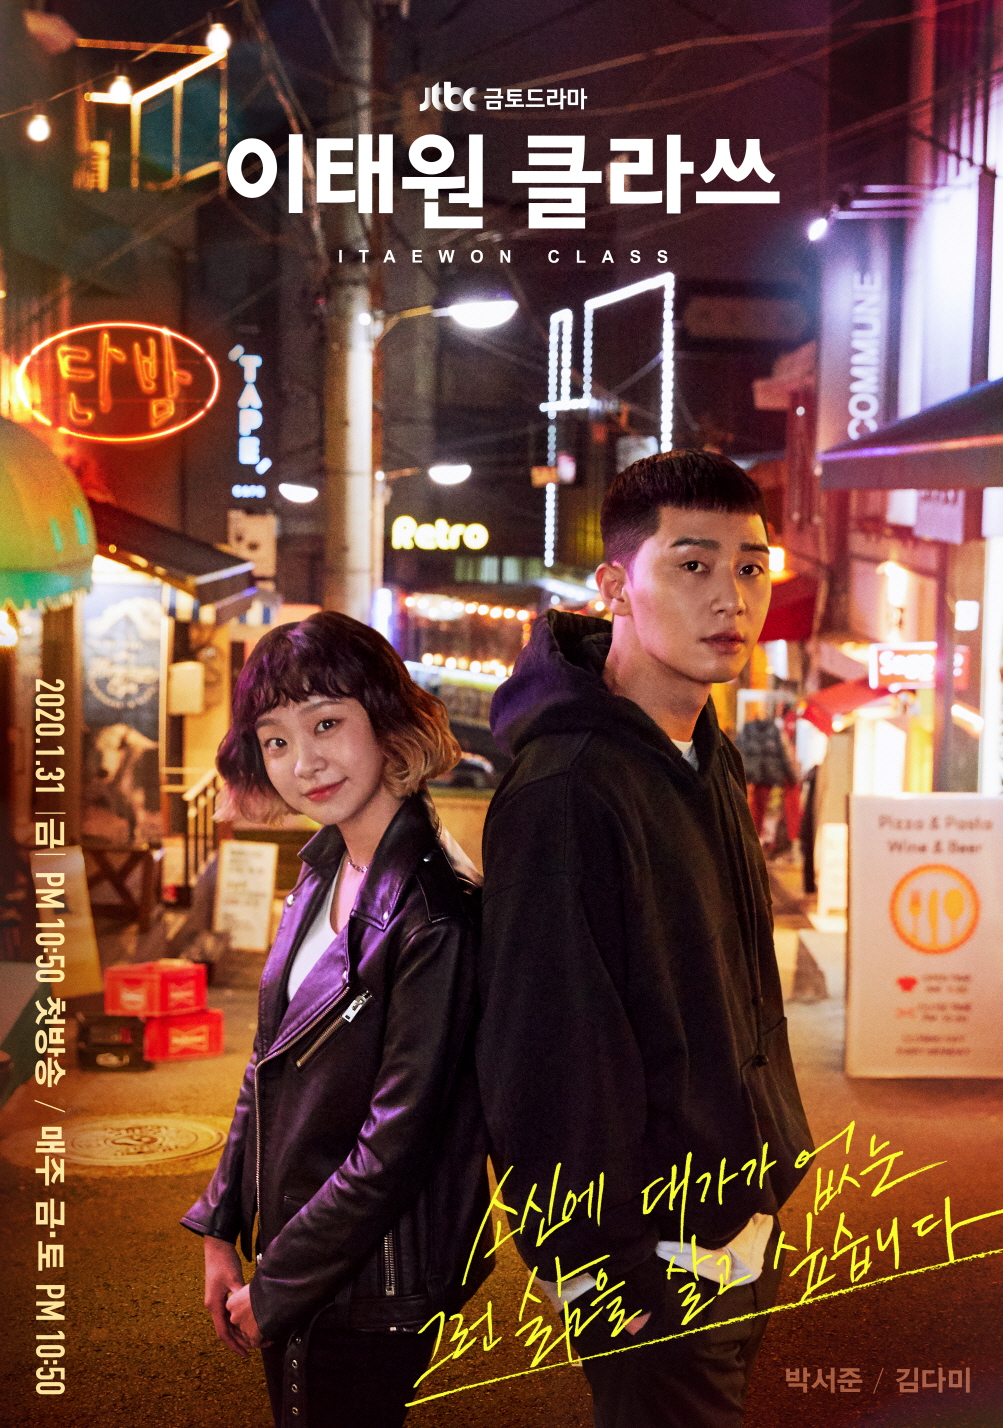 The young people who are hot and hot in the house theater finally rush.JTBCs new gilt drama Itaewon Klath (directed by Kim Seong-yoon, playwright Jo Kwang-jin, produced showbox and writing, and original Web toon Itaewon Klath) will be broadcast for the first time today (31st).Itaewon Clath is a work that depicts the hip rebellion of youths who are united in an unreasonable world, stubbornness and popularity.Their entrepreneurial myths, which pursue freedom with their own values ​​are dynamically unfolded in the small streets of Itaewon, which seems to have compressed the world.Based on the next Web tone of Dongmyeong, one of the leading life web toon, it has completed a perfect lineup that guarantees perfection such as Park Seo-joon, Kim Dae-mi, Yoo Jae-myeong and Kwon Nara.Here, the combination of director Kim Seong-yoon of Gurmigreen Moonlight and Discovery of Love and author Jo Kwang-jin, who wrote the script directly, makes the drama fans more excited.So, I looked at the points of observation that the production team of Itaewon Klath directly conveyed before the first broadcast.# Park Seo-joon X Kim Dae-mi X Yoo Jae-myeong X Kwon Nara, Acting and Synchro Rate Class Other Actors!The meeting of Park Seo-joon, Kim Dae-mi, Yoo Jae-myeong and Kwon Nara is the reason why they are waiting for Itaewon Clath in itself.Park Seo-joon is a hot-blooded young man who has been accepting Itaewon as a conviction, and expects the birth of Legend Life Catch (Life Character).It is hoped that the outspoken counterattack against the rival Jangga, which is entangled in evil, will provide a thrilling catharsis.Kim Dae-mi, a notable newcomer, will star in his first drama as IQ162s highly intelligent Sociopath Joy Seo.The appearance of the village fairy is predicted with solid acting and unique charm. The transformation of the actor Yoo Jae-myeong, who believes in it, also attracts attention.It is a cool authoritarian without mercy and chairman of Jang Dae-hee, who leads the Jangga at the peak of the Korean food service industry.Kwon Nara is the first love of Park Seo-joon and the head of the competent strategic planning team of Jangga.As other actors in the class, which are full-mounted from the undisputed acting ability to the web tear synchro rate, are gathered, they are more excited than ever to add their own colors to their character with their own unique colors.# Legend of Legend Life Web toon Itaewon Clath Finally meet with Drama!The Moonlight of Gurmi Green, directed by Kim Seong-yoon and author Jo Kwang-jin,Dongmyeongs next Web toon Itaewon Clath has been popular and popular since the time of the series, and many readers are still considered to be Life Web toon.The remarkable record of starting the series in 2017 and exceeding the cumulative inquiry of 220 million views, the next Web toon top paid sales, and 9.9 points proves the power of the original.Above all, the collaboration between director Kim Seong-yoon and author Jo Kwang-jin, who have been recognized for their detailed and sensual production through Gurmigreen Moonlight and Discovery of Love, guarantees perfection.There are certainly other narratives, but I focused more on complementation than discrimination with the original work, said Jo Kwang-jin, and there were many stories that I could not solve in the original work.I think that those who have seen Web toon will have fun to see the relationship between the characters and the characters of the deeper and richer characters. # The hot synergy of the emerging and emerging new generation of the masters of the Manleb Acting! Honey Jam power UPThe bad performance of Park and Jang Dae-hee (Yoo Jae-myung) leads to a tense match between Itaewons new catcher Sanbam and the monster Janga in the food service industry.Another point of attention to watch is the performance of Actor Corps, which added to the youthful energy-filled Sanbam members and the unfavorable Janga family.First, Kim Dong-hee takes charge of Joy Seo (Kim Dae-mi) Baragi and Jang Geun-soo, the second son of Jangga, to raise expectations.His story of leaving the Janga and entering the State Night with Joy Seo stimulates curiosity.Ahn Bo-hyun challenges his first villain as the eldest son of the accident bundle of the janga and the heir of the mangy, Jang Geun-won.Kim Hye-eun, who adds trust by name alone, also joins the Jangga family, whose executive director and capable ambition emits a girl crush charm with Kang Min-jung.The appearance of Ryu Kyong-su and Lee Ju-young, who will meet as members of Danbam and show unexpected chemistry, also attracts attention.Ryu Kyong-su plays Choi Seung-kwon, a former gangster-turned-night employee, and Lee Joo-young plays Ma Hyun-yi, a chef of the night with a secret.The hot synergy of the emerging new generation and the masters of the inner world is added to the curiosity.Today (31st) will be broadcast first on JTBC at 10:50 p.m.